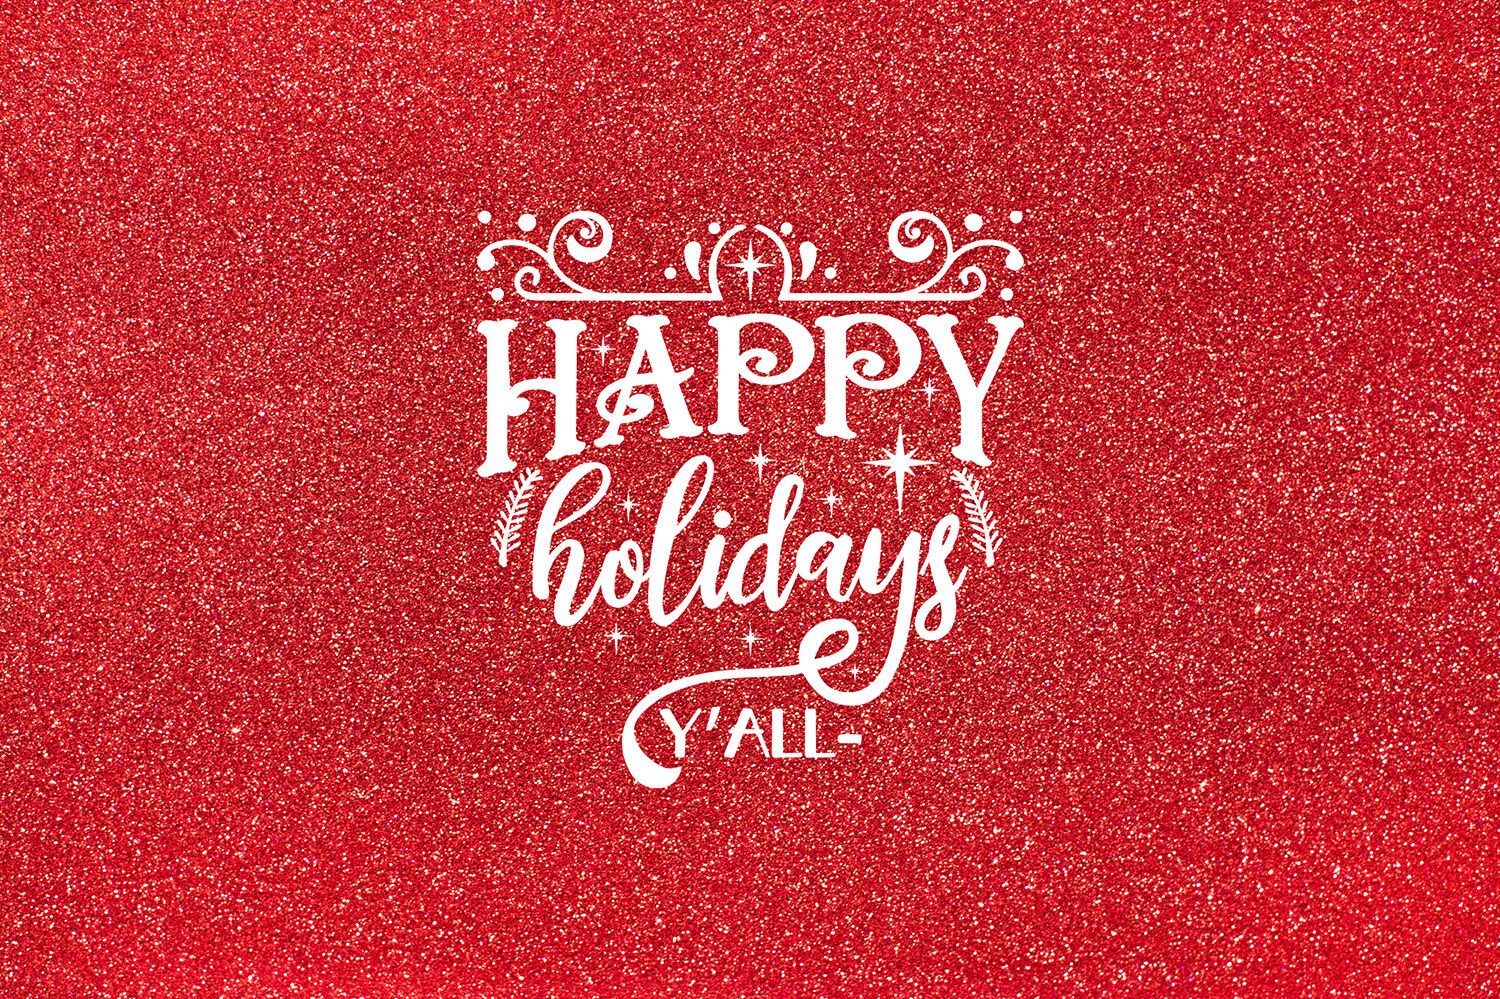 Happy Holidays Y All Christmas Svg Christmas Quotes Svg By Craftlabsvg Thehungryjpeg Com